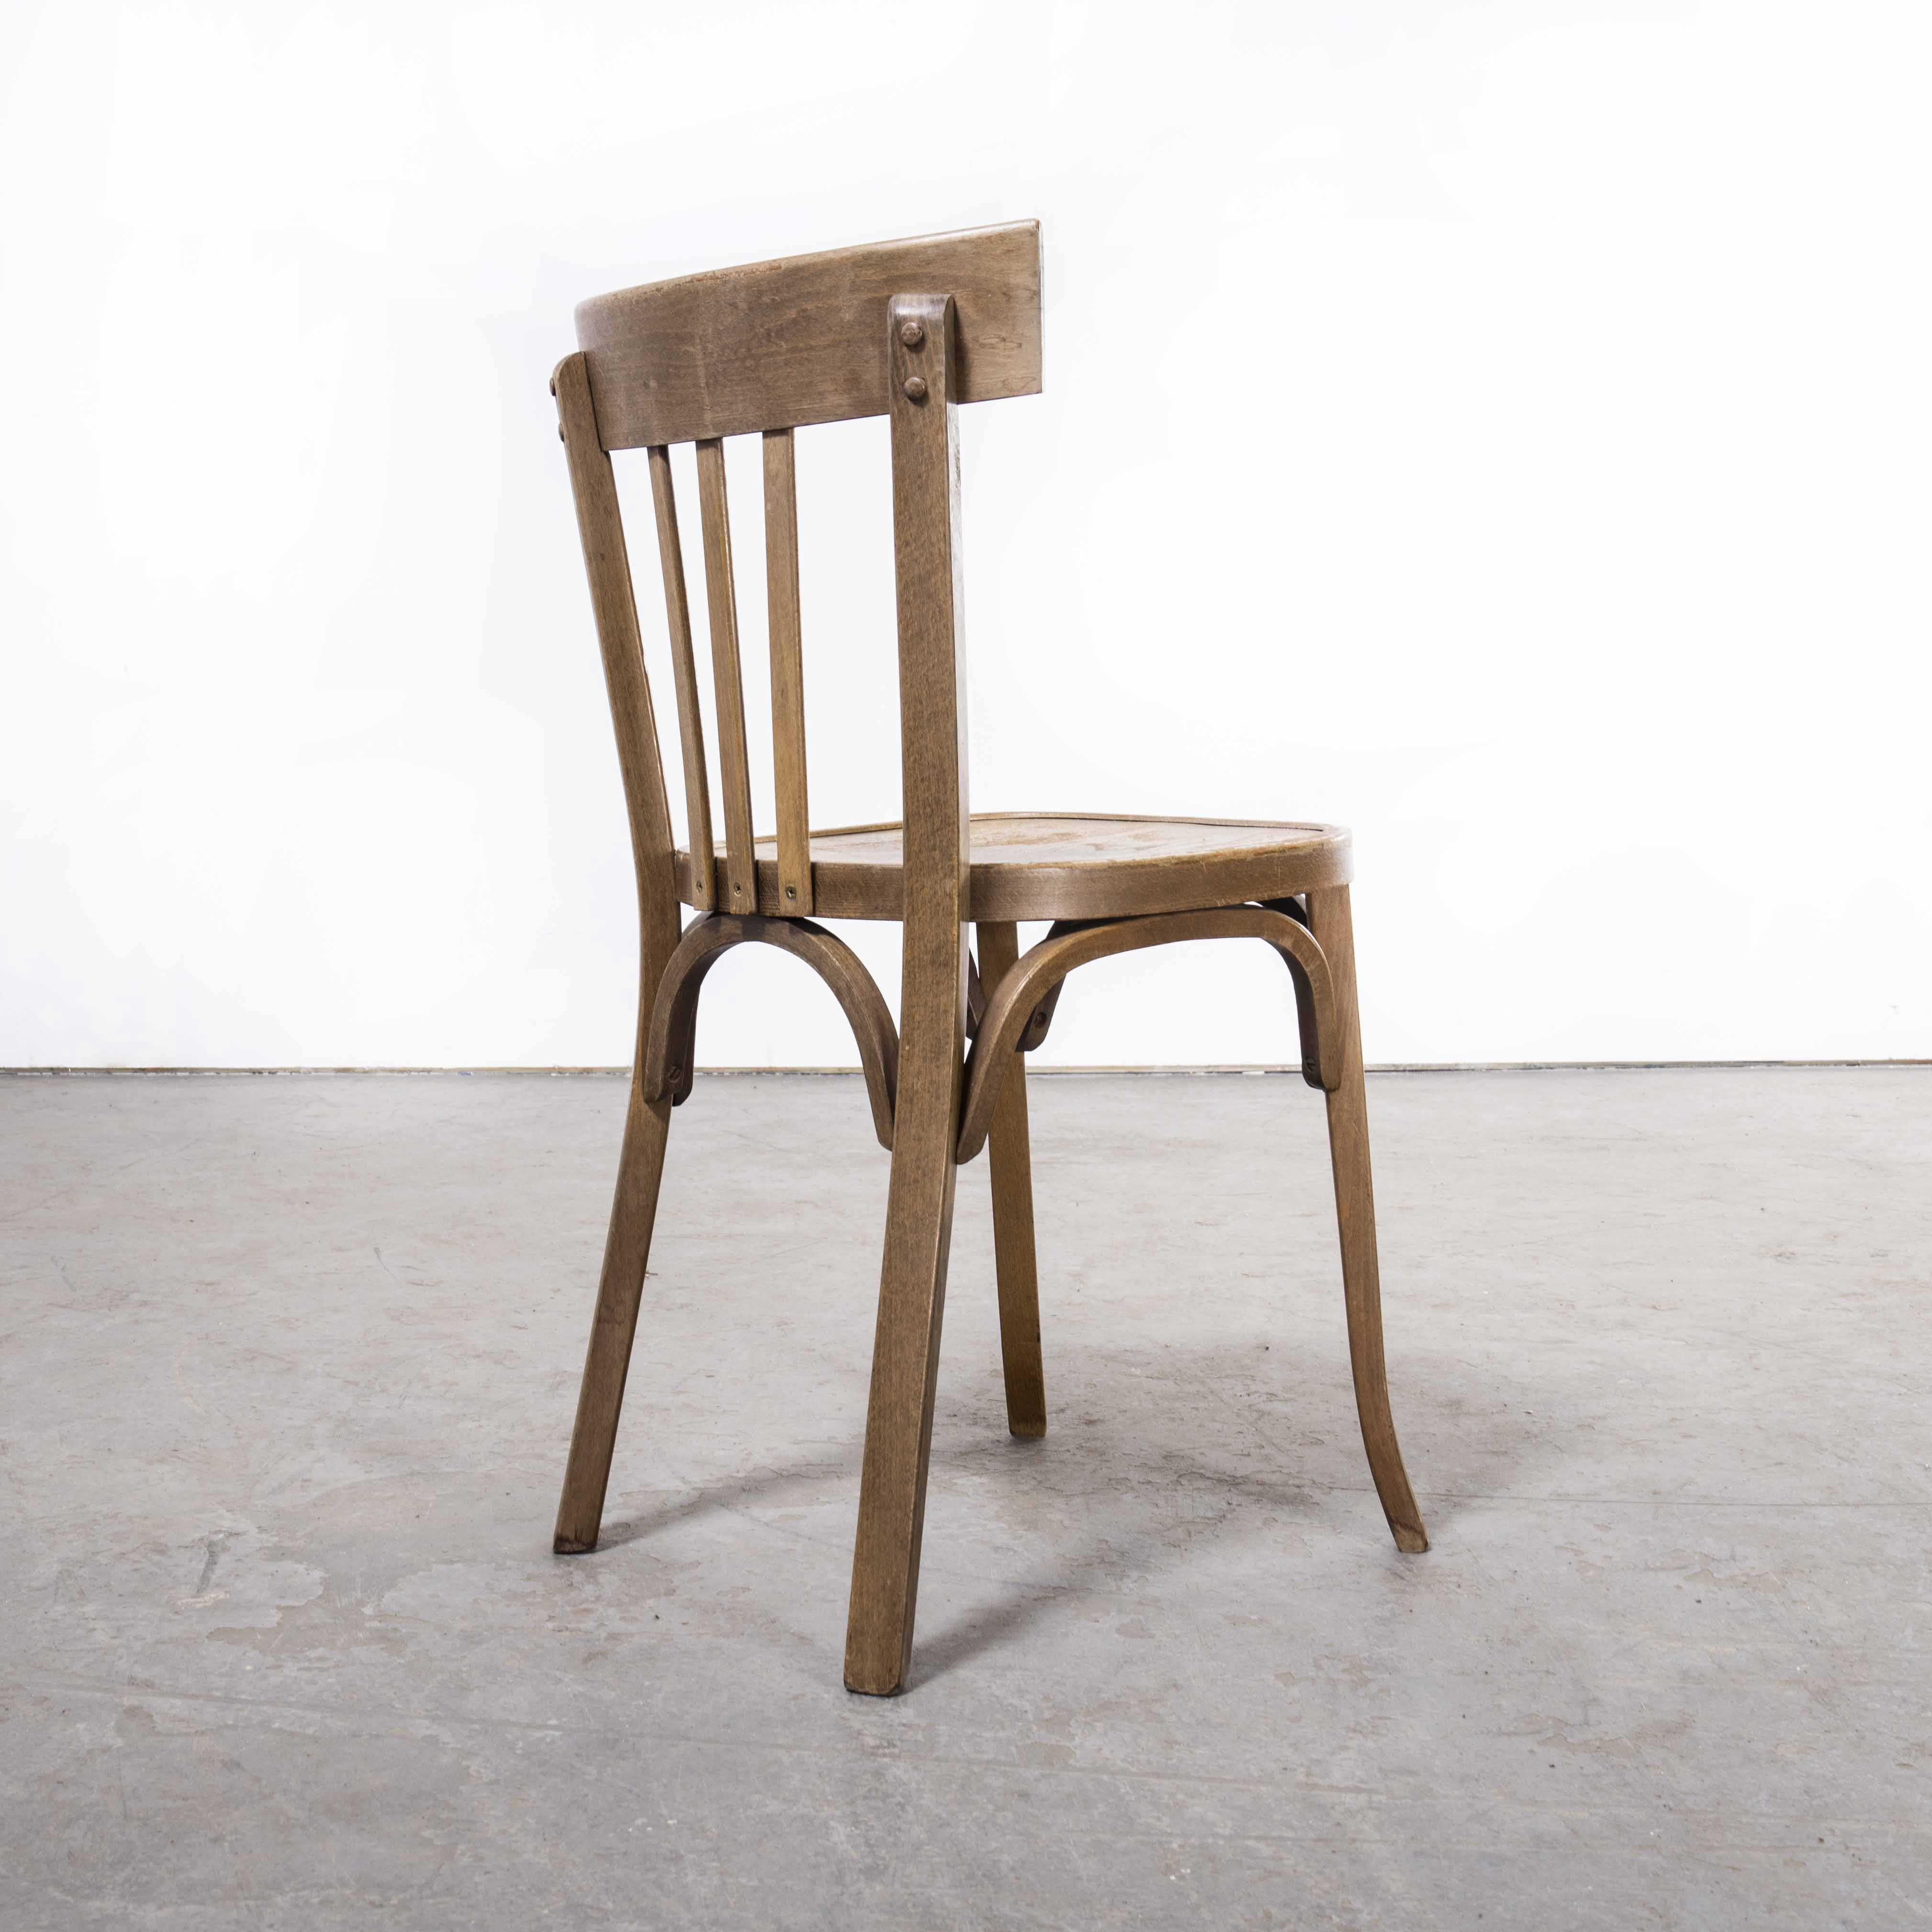 1930’s Fischel French bentwood saddle back dining chairs – set of ten
1930’s Fischel French bentwood saddle back dining chairs – set of ten. The process of steam bending beech to create elegant chairs was discovered and developed by Thonet, but